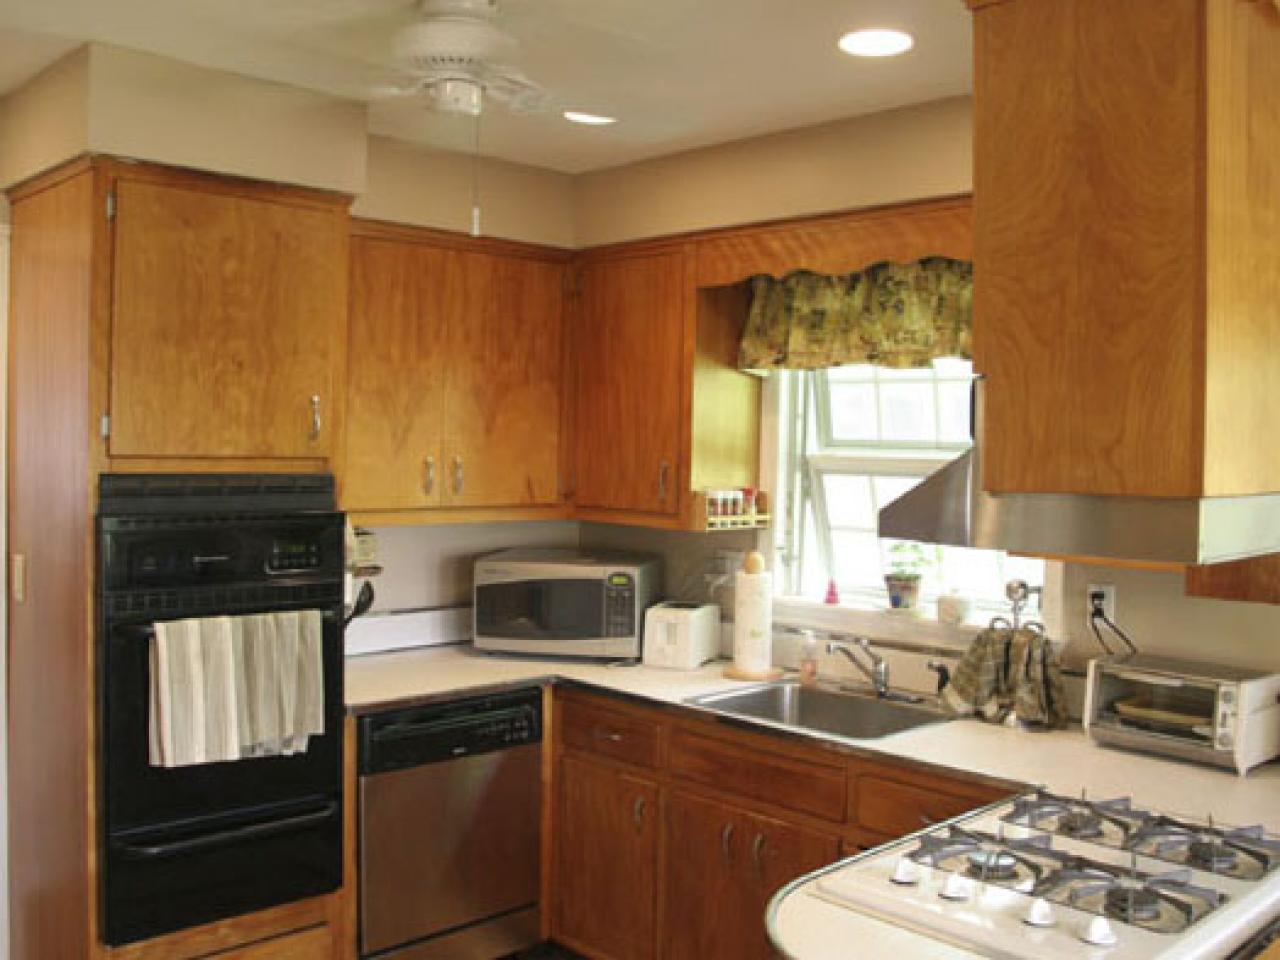 How To Give Your Kitchen Cabinets A Makeover Hgtv